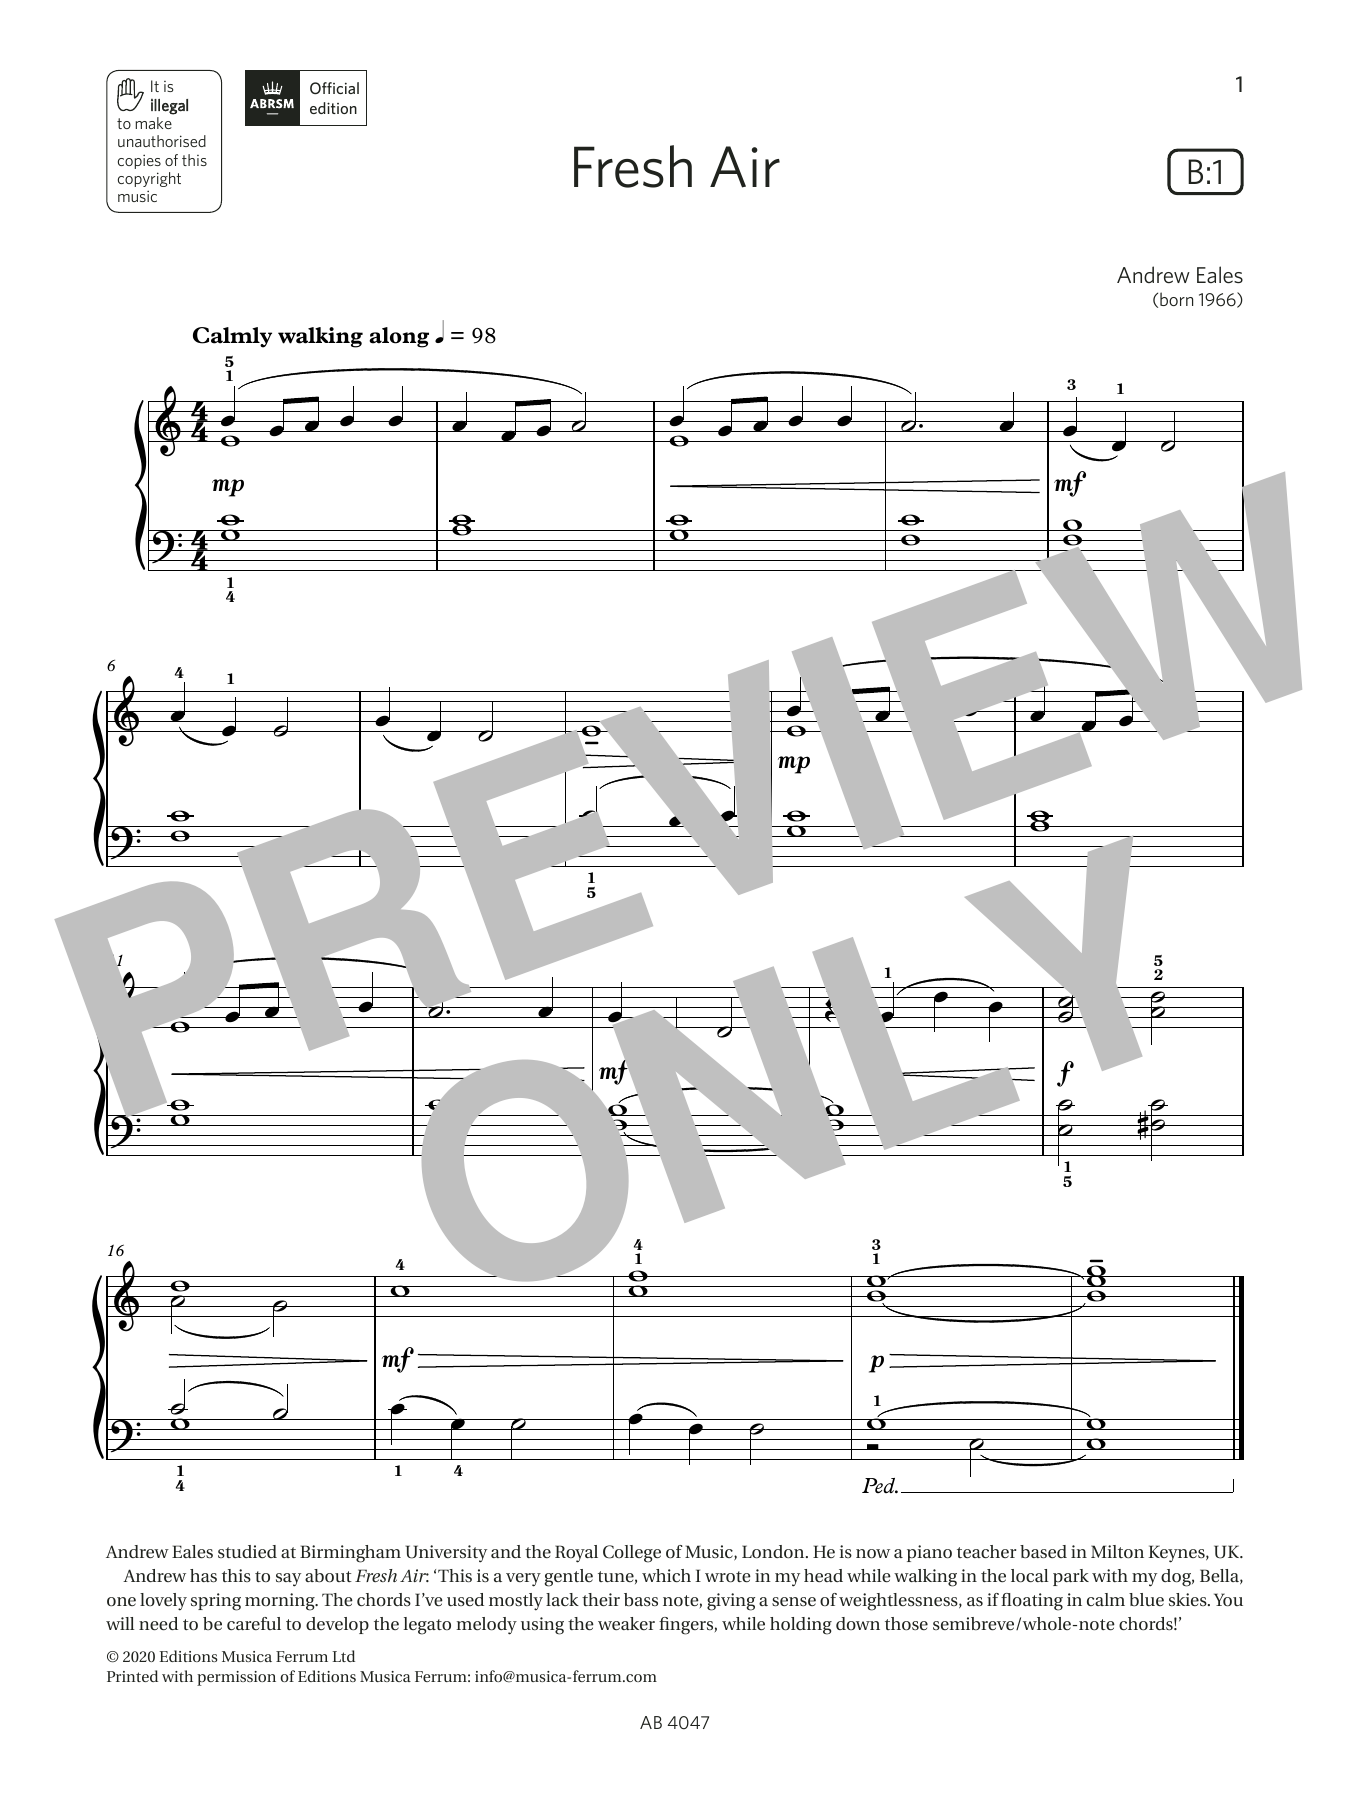 Download Andrew Eales Fresh Air (Grade 1, list B1, from the A Sheet Music